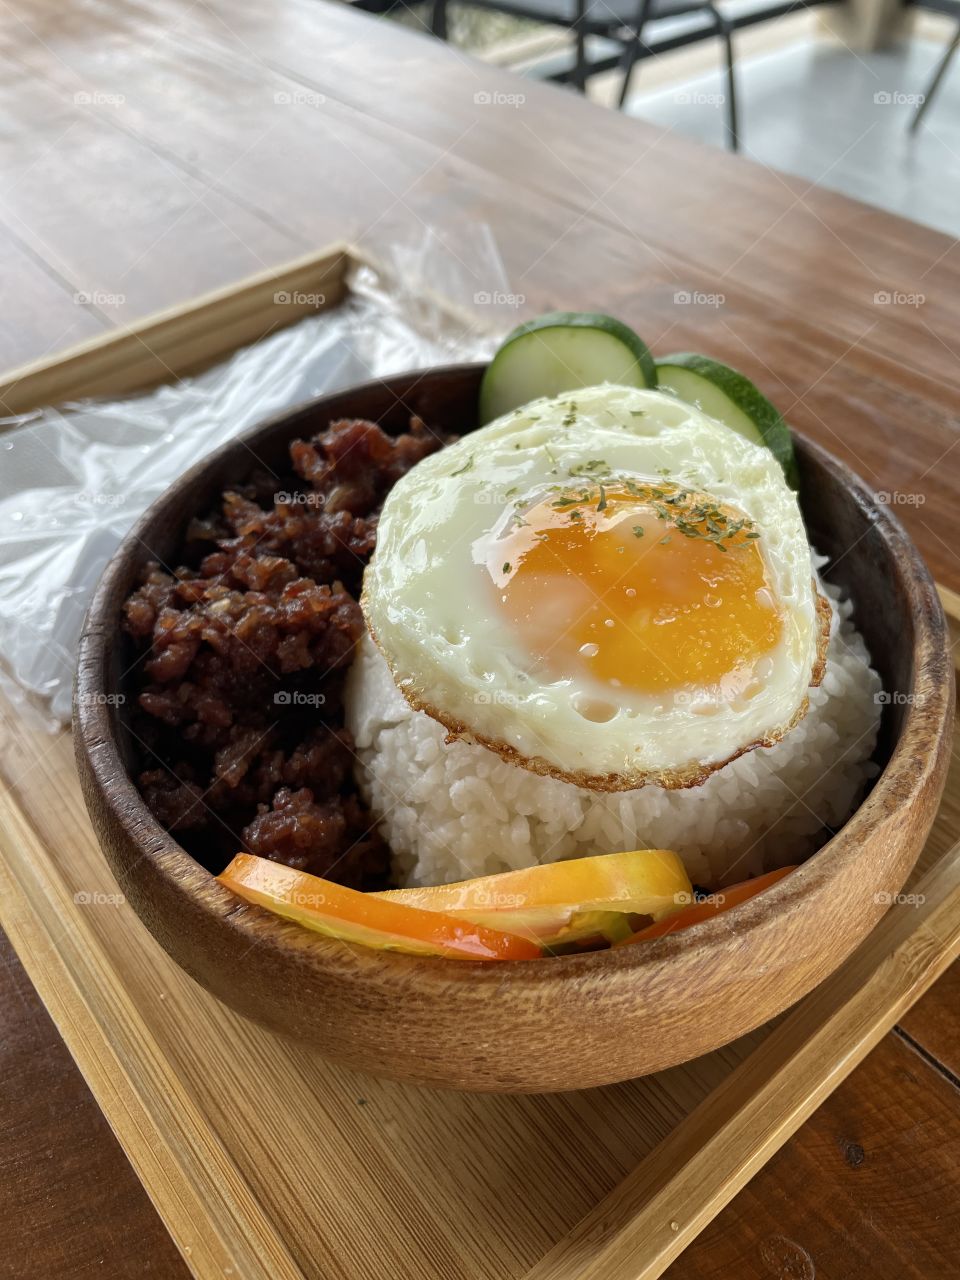 Breakfast set of Chorizo “bungkag” with rice and egg